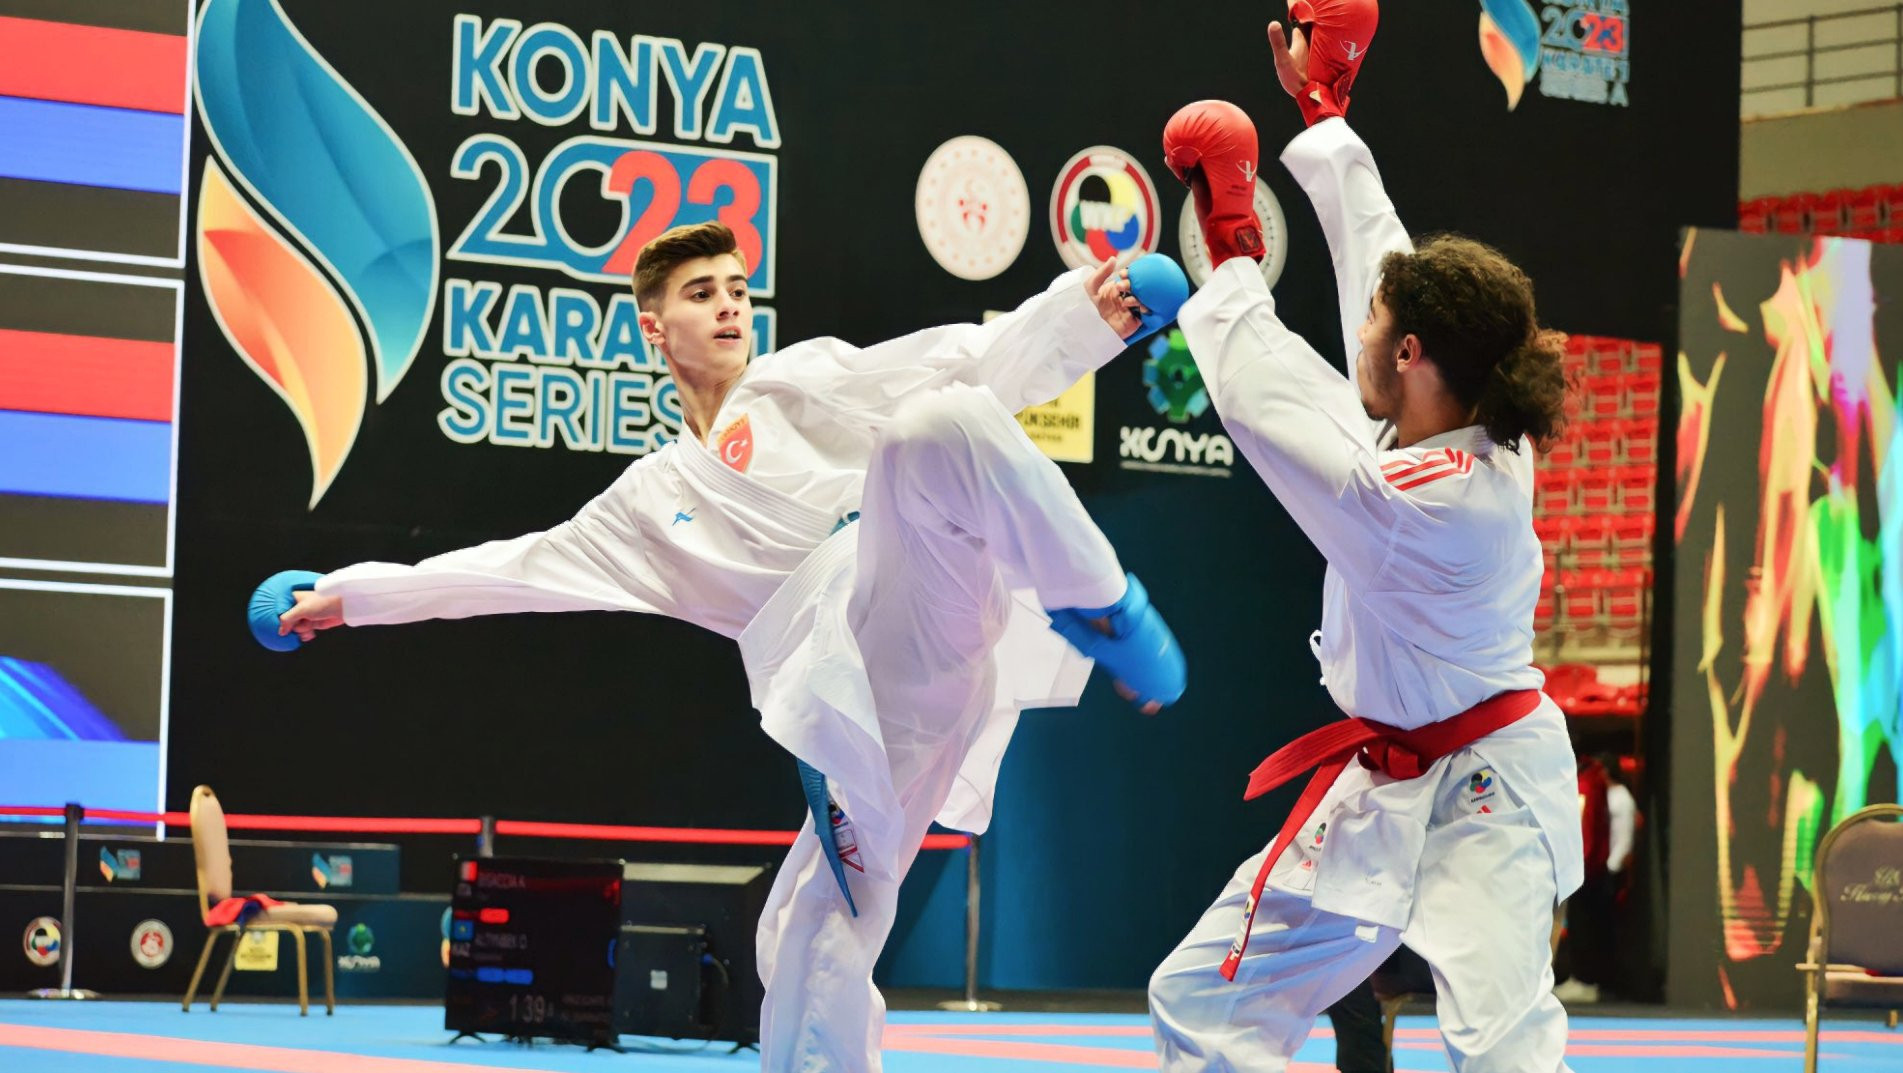 Turkey triumph at home on final day of Karate 1-Series A in Konya